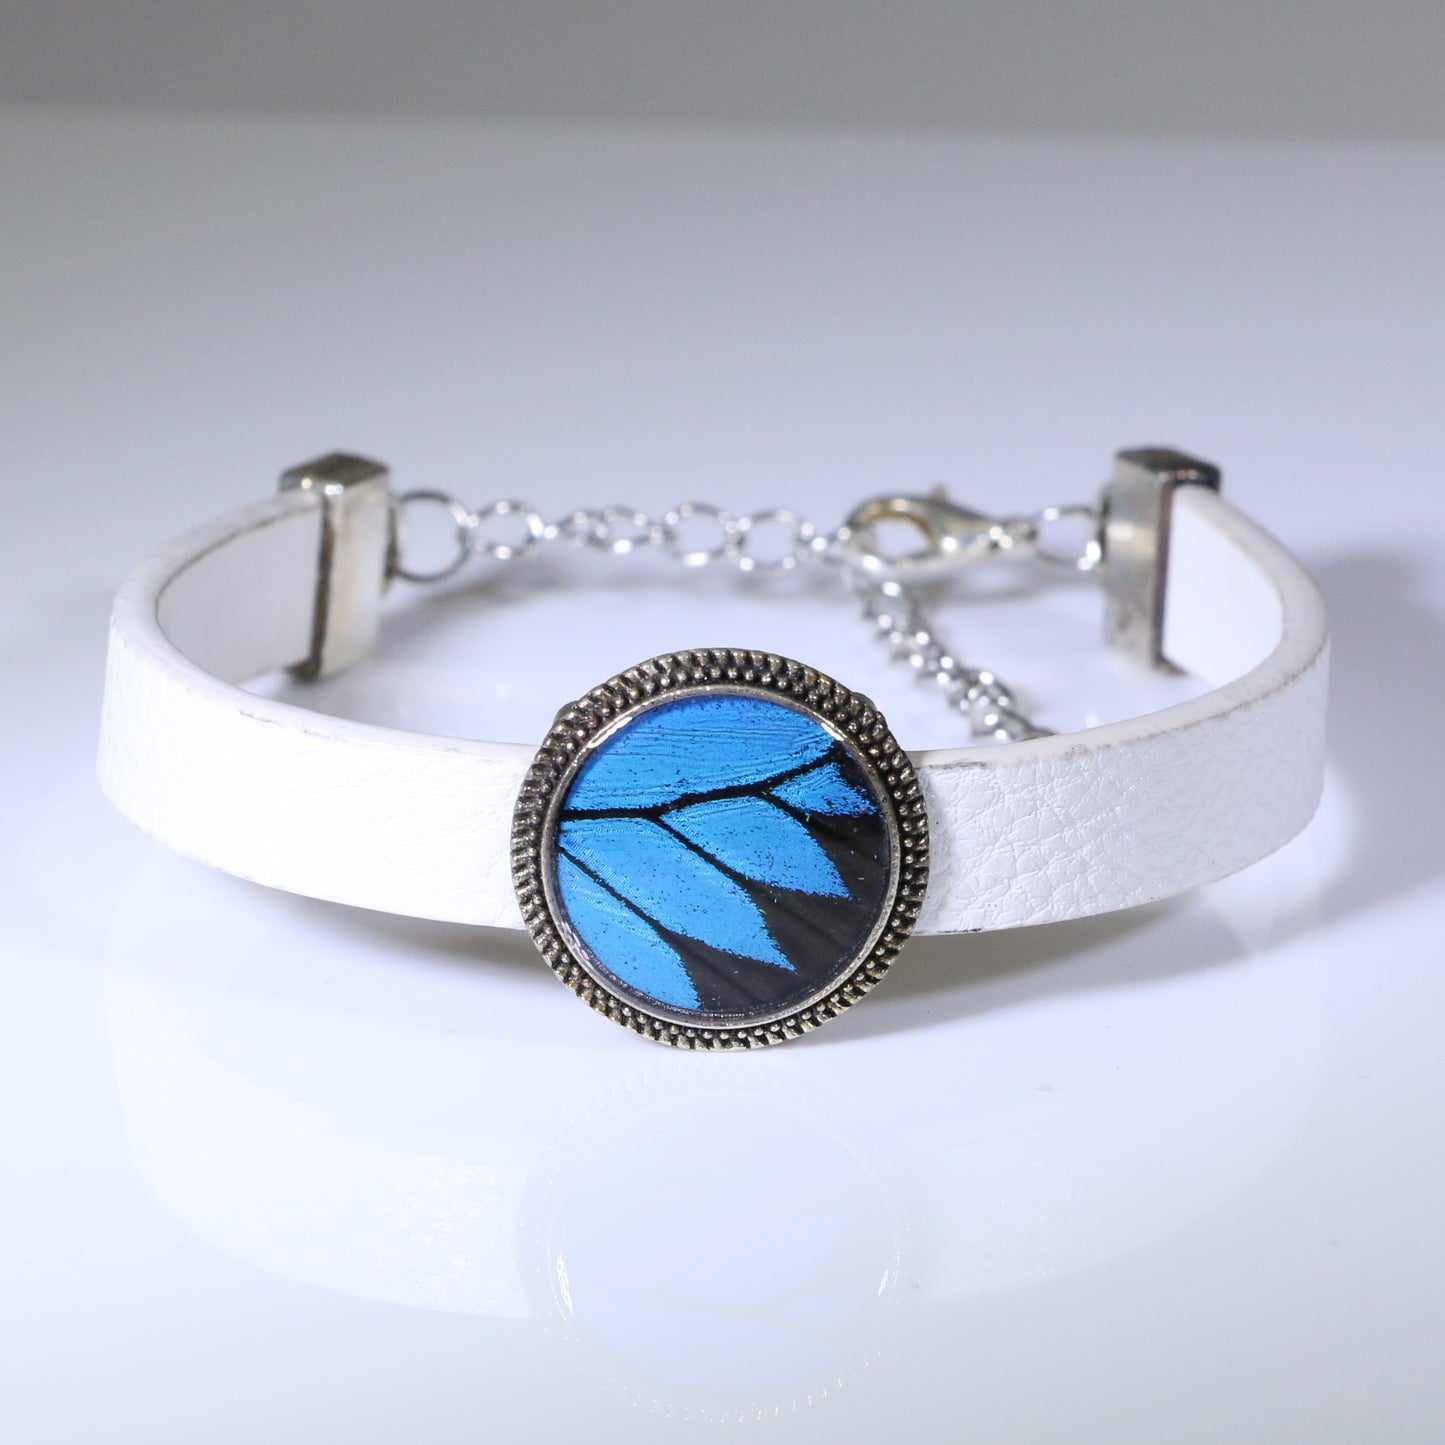 53307 - Real Butterfly Wing Jewelry - Bracelets - Round - Small - White - Blue Mountain Swallowtail